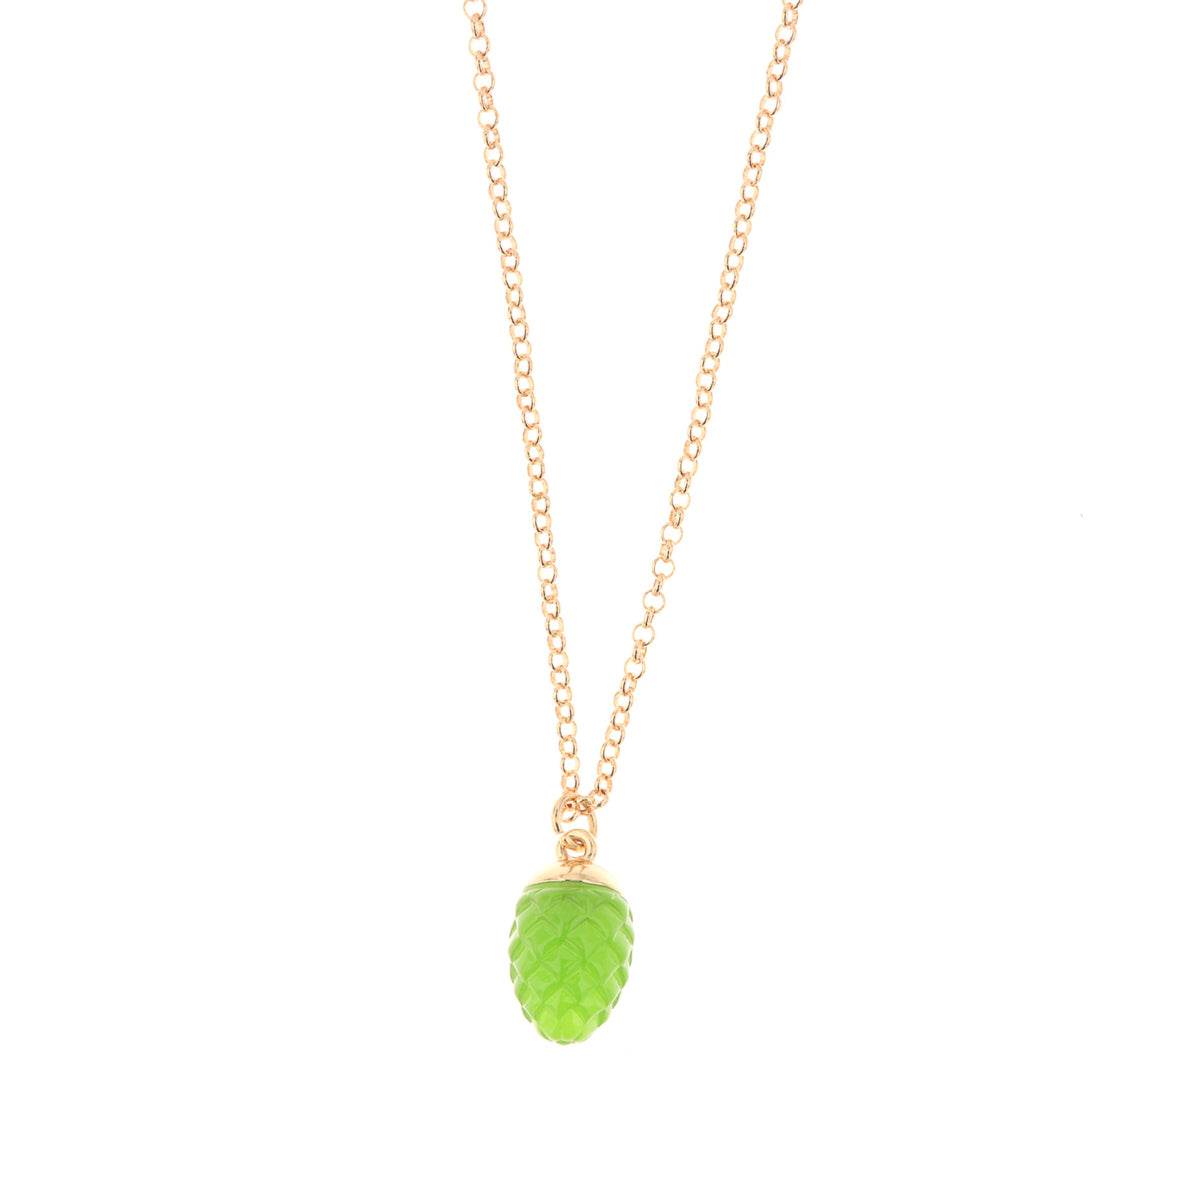 Metal necklace with green charming pine -shaped pendant